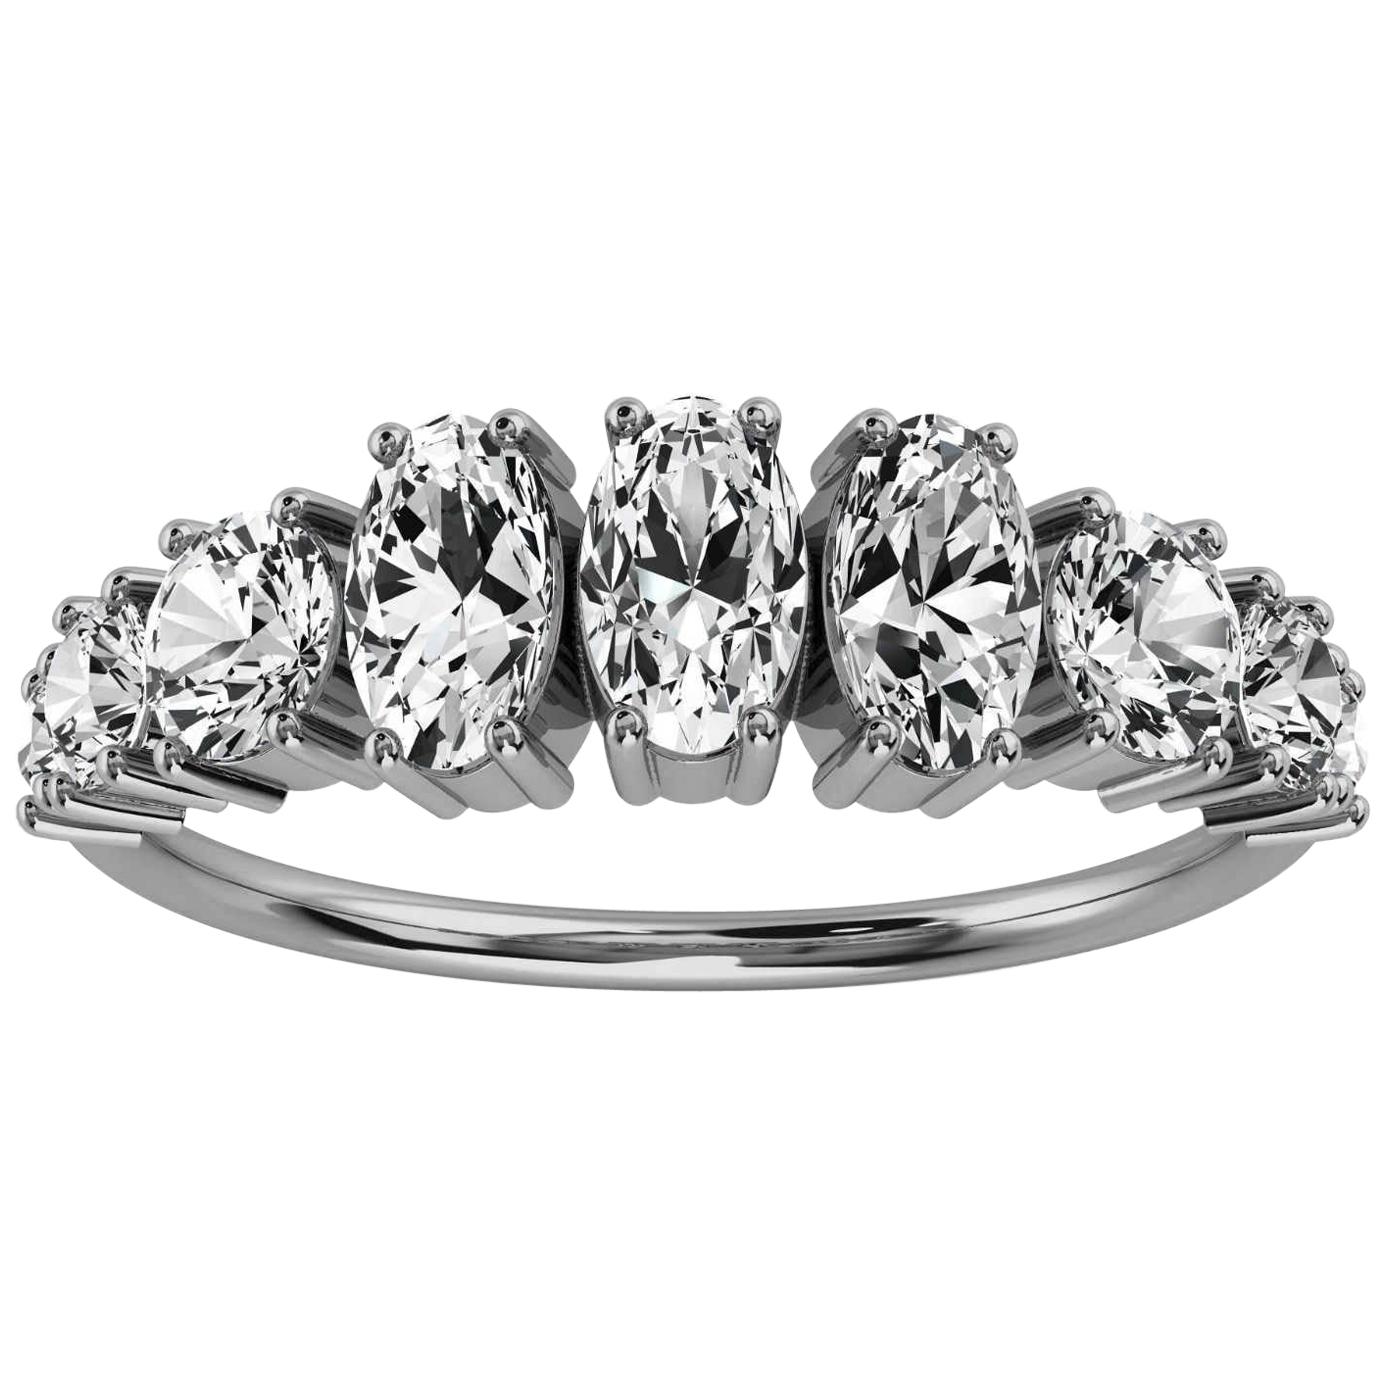 18k White Gold Kym Oval and Round Organic Design Diamond Ring '1 1/4 Ct. Tw' For Sale